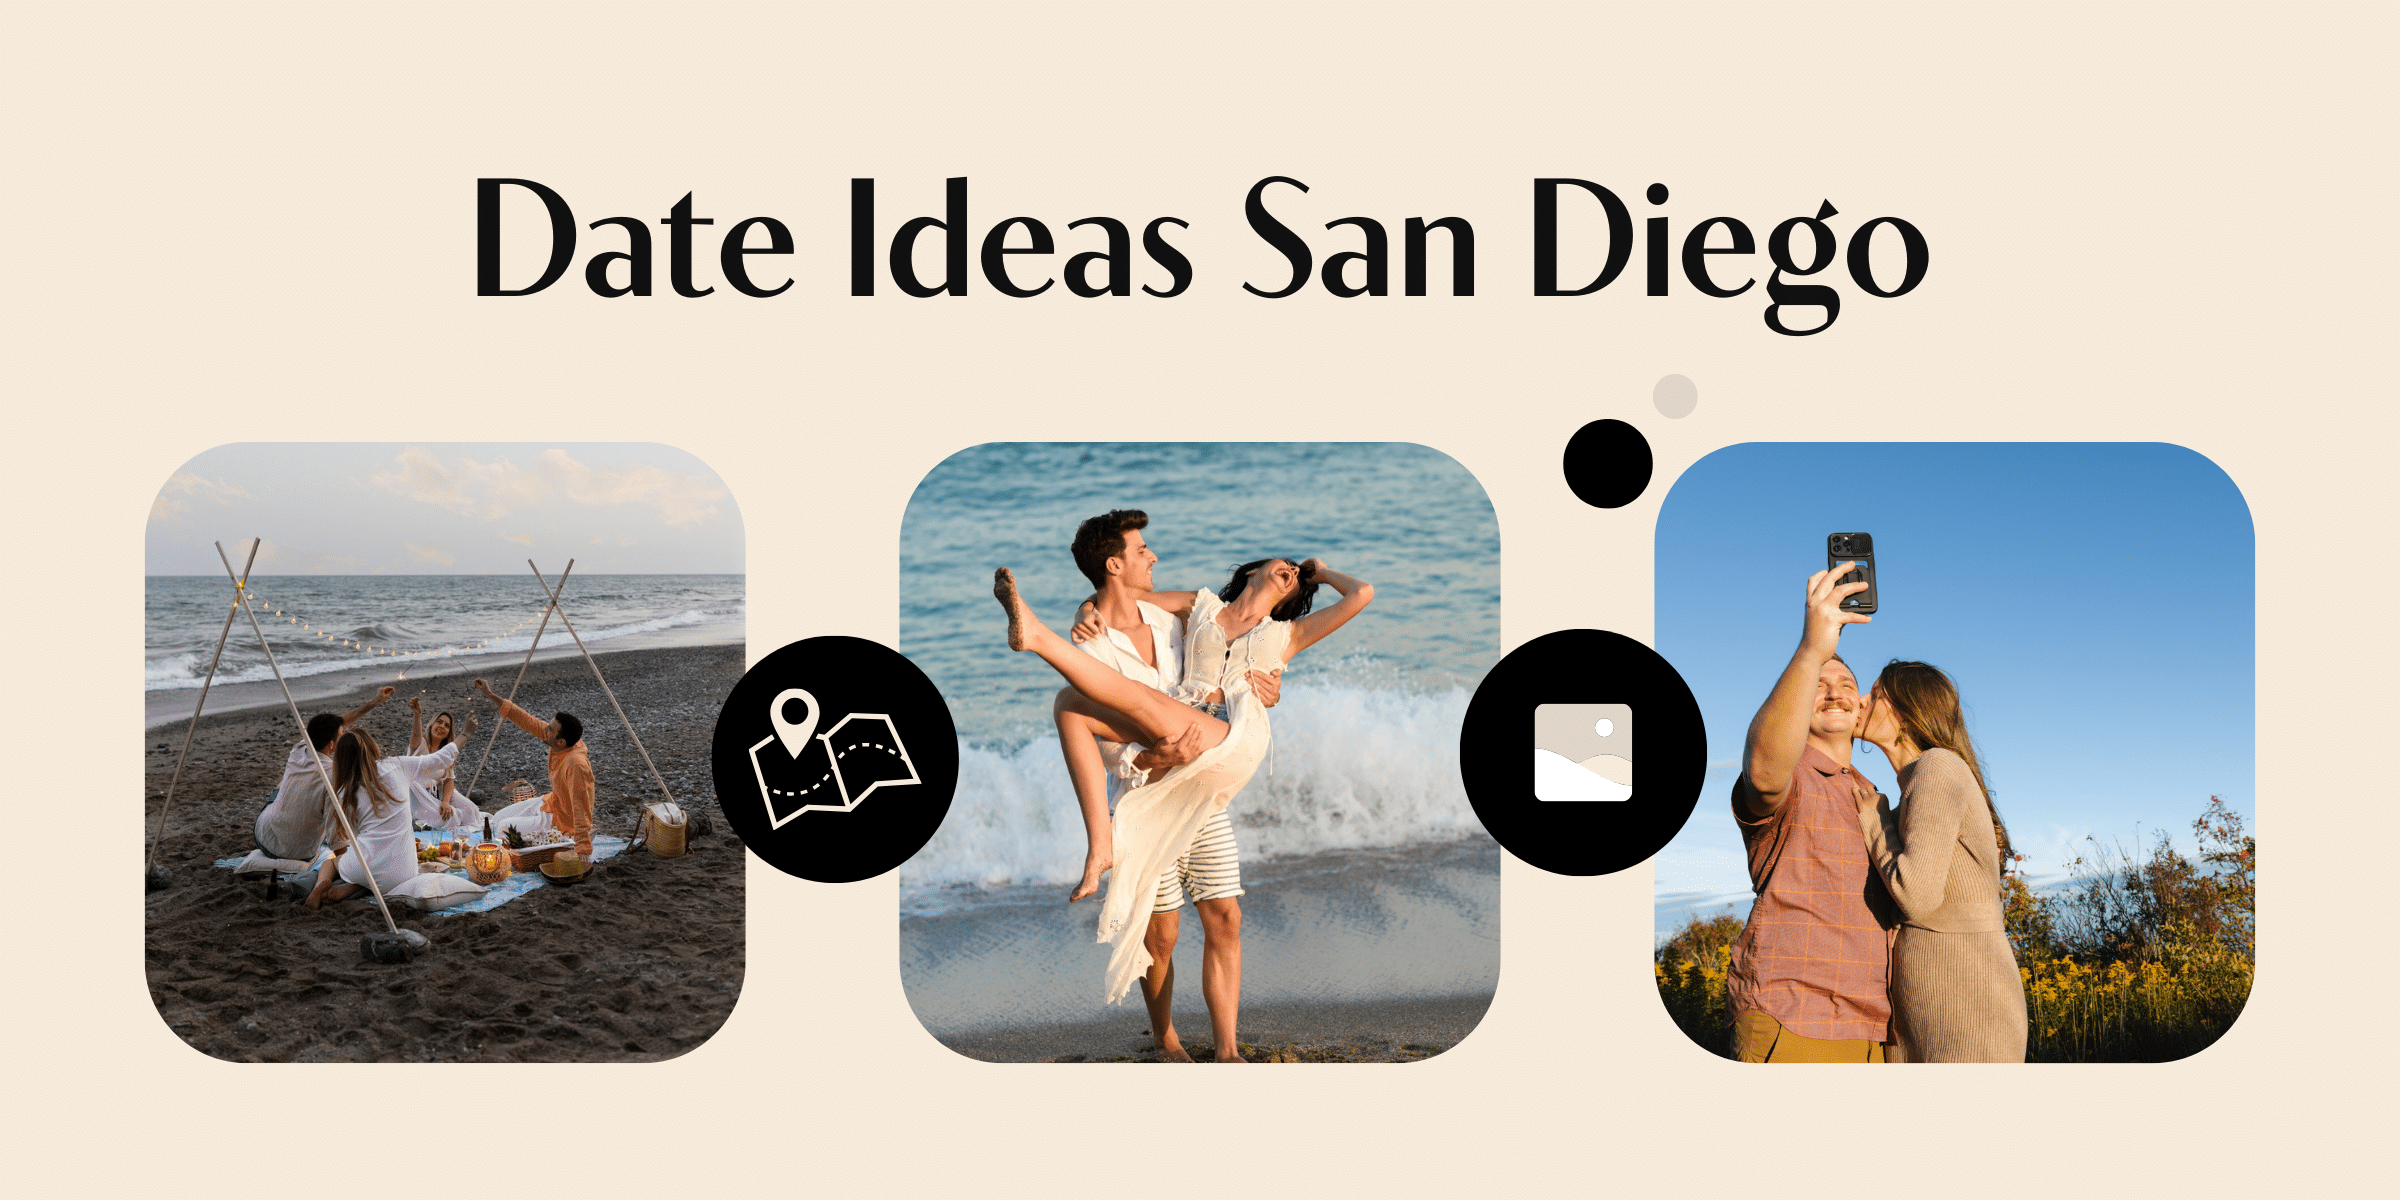 In need of some date ideas in San Diego? We’ve rounded up our favorite date spots in America’s Finest City to help you nab a second date.